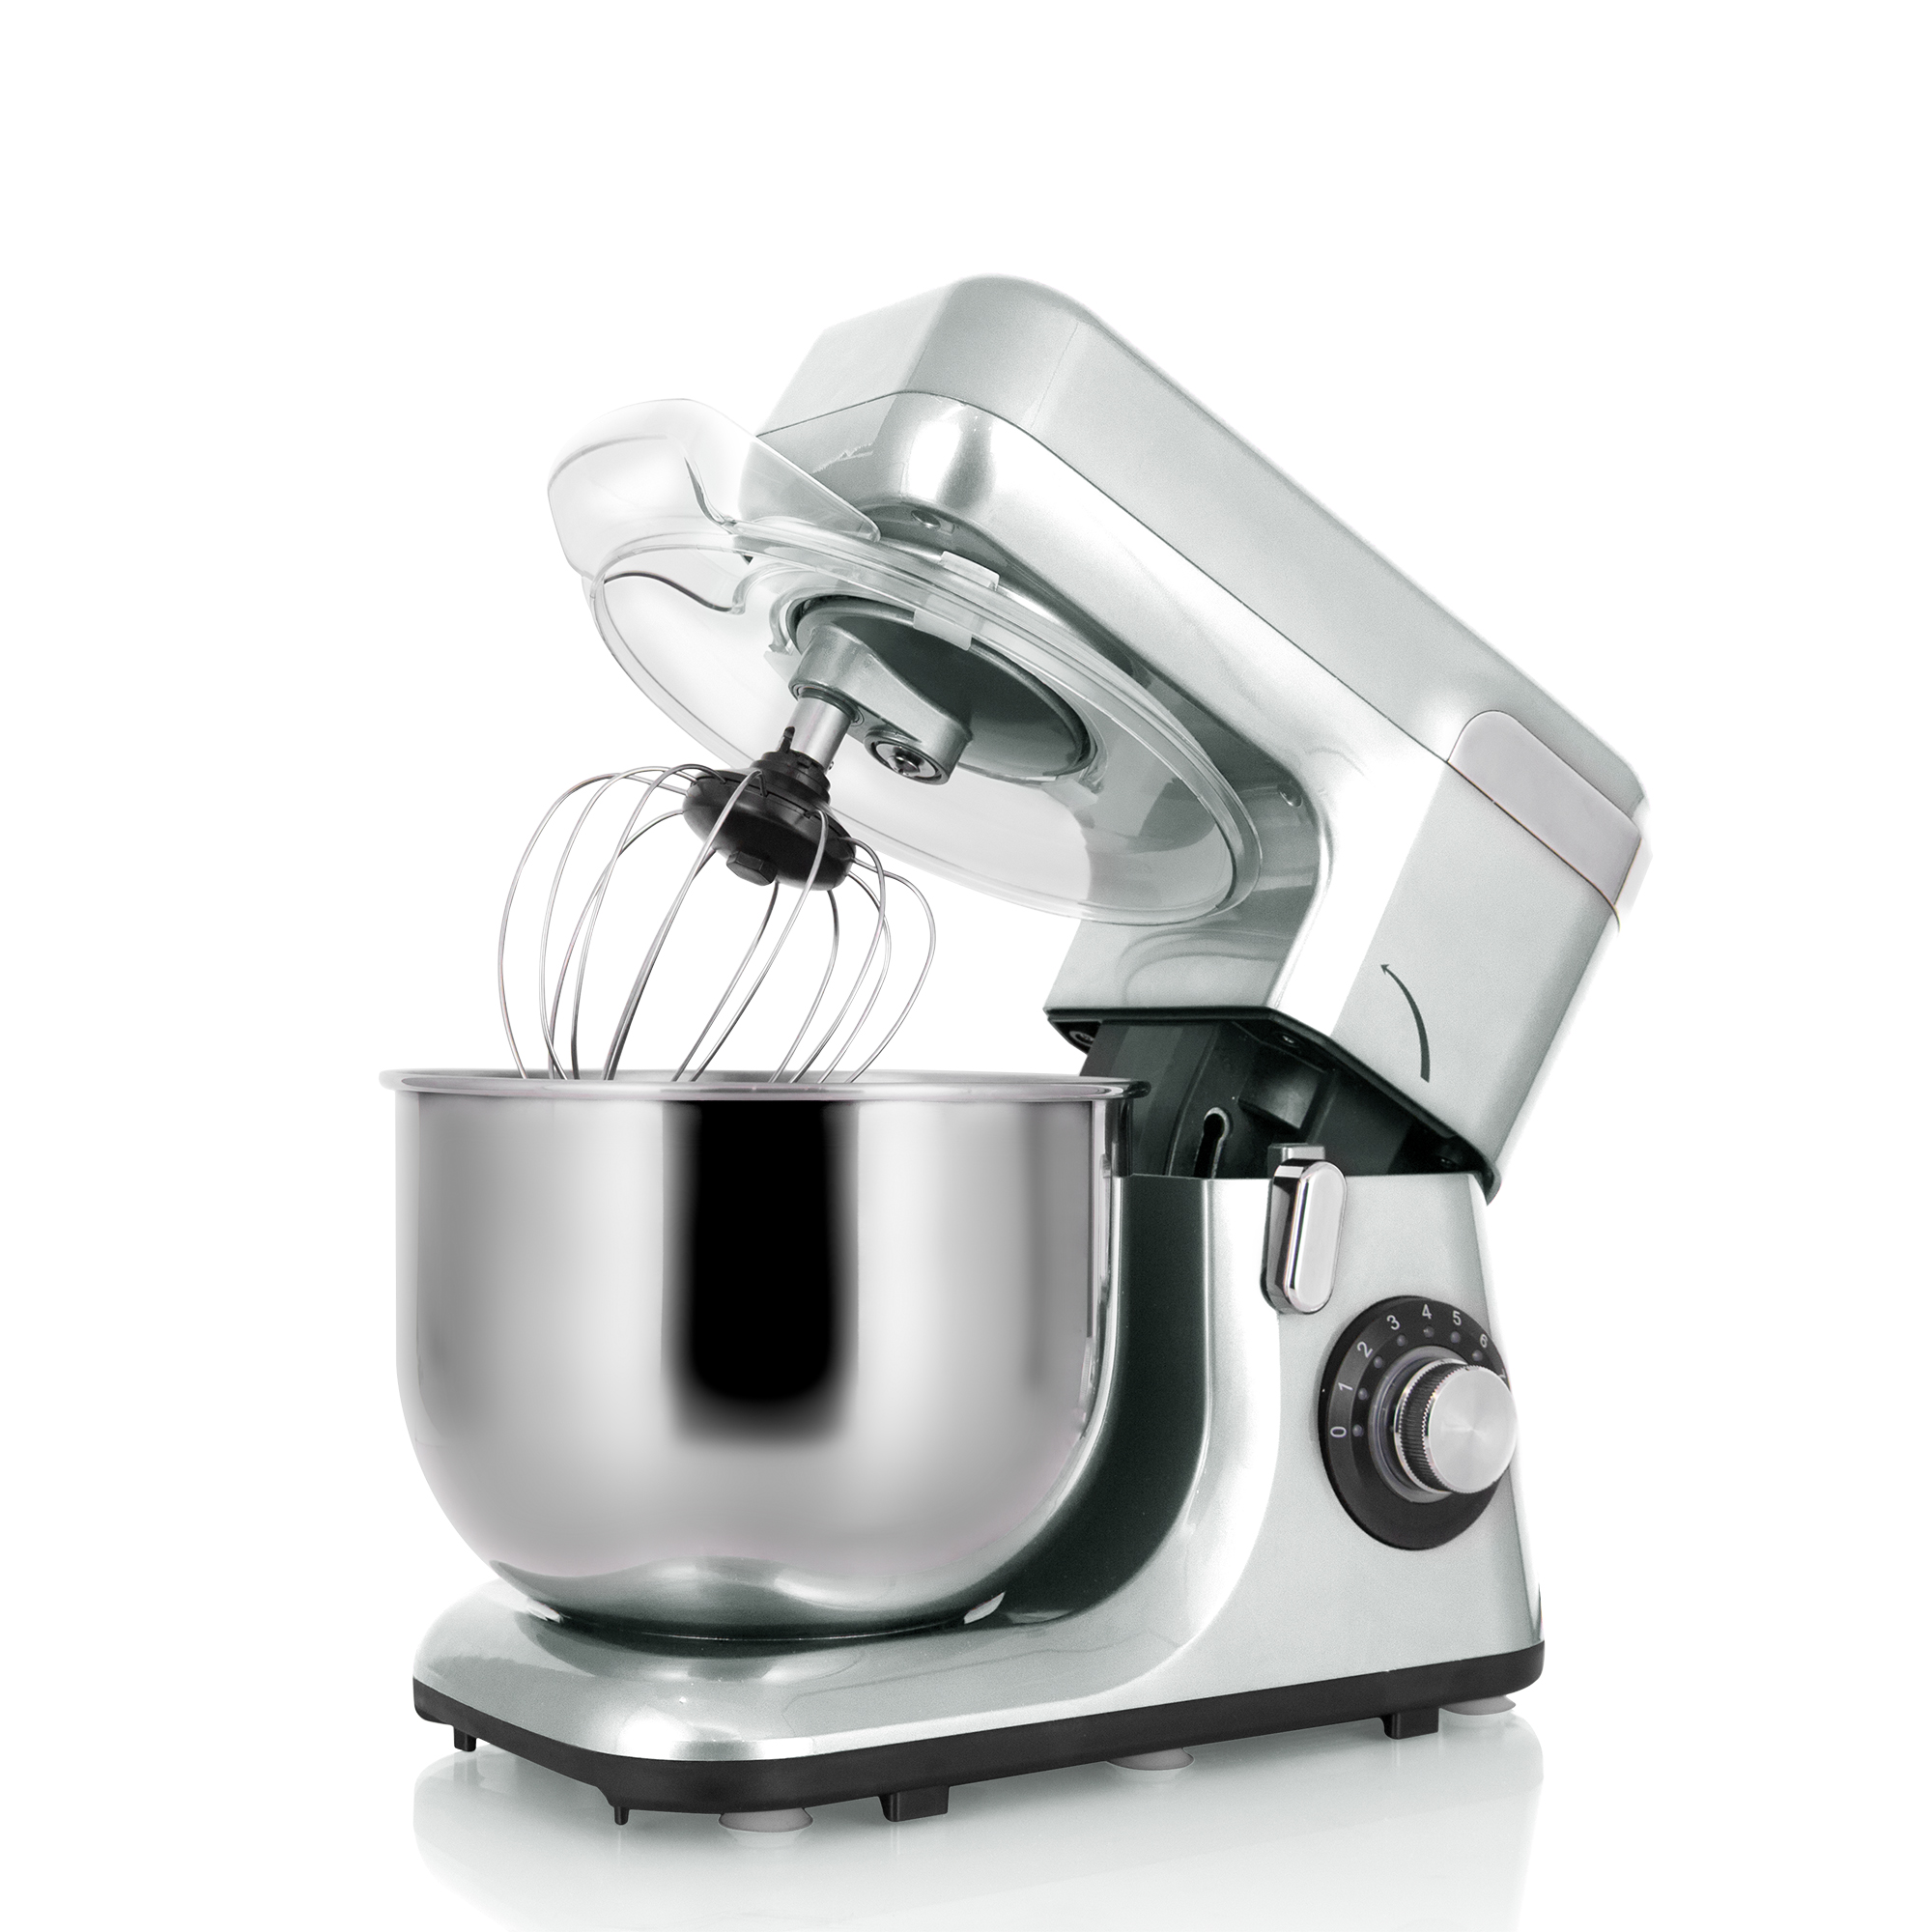 MK-55 Good Quality 1200W 8 Speed plastic shell Stand Food Mixer With a Rotating Bowl For Kitchen Sale